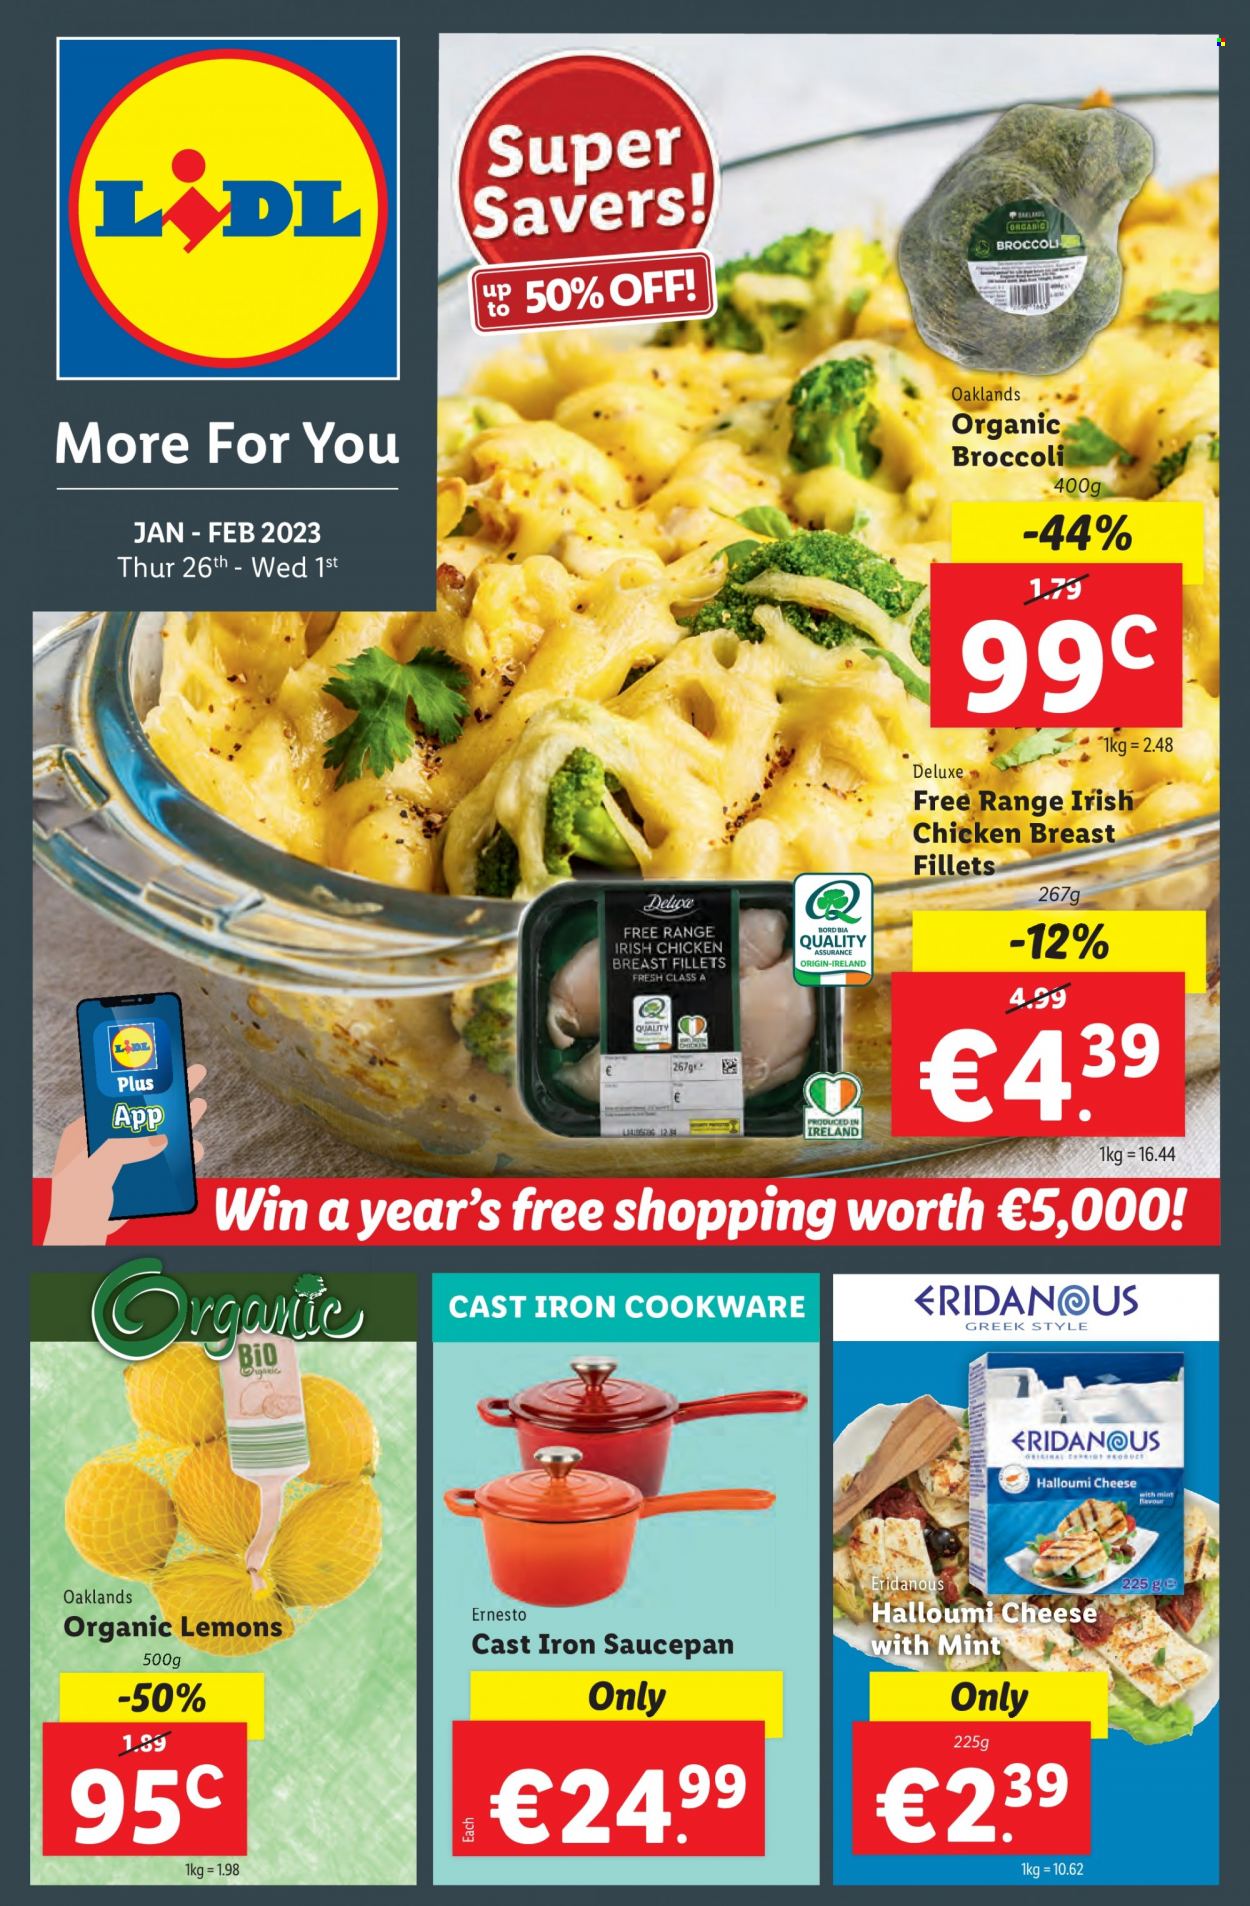 thumbnail - Lidl offer  - 26.01.2023 - 01.02.2023 - Sales products - ESPRIT, Hewlett Packard, broccoli, lemons, halloumi, cheese, chicken breasts, Ernesto, cookware set, saucepan. Page 1.